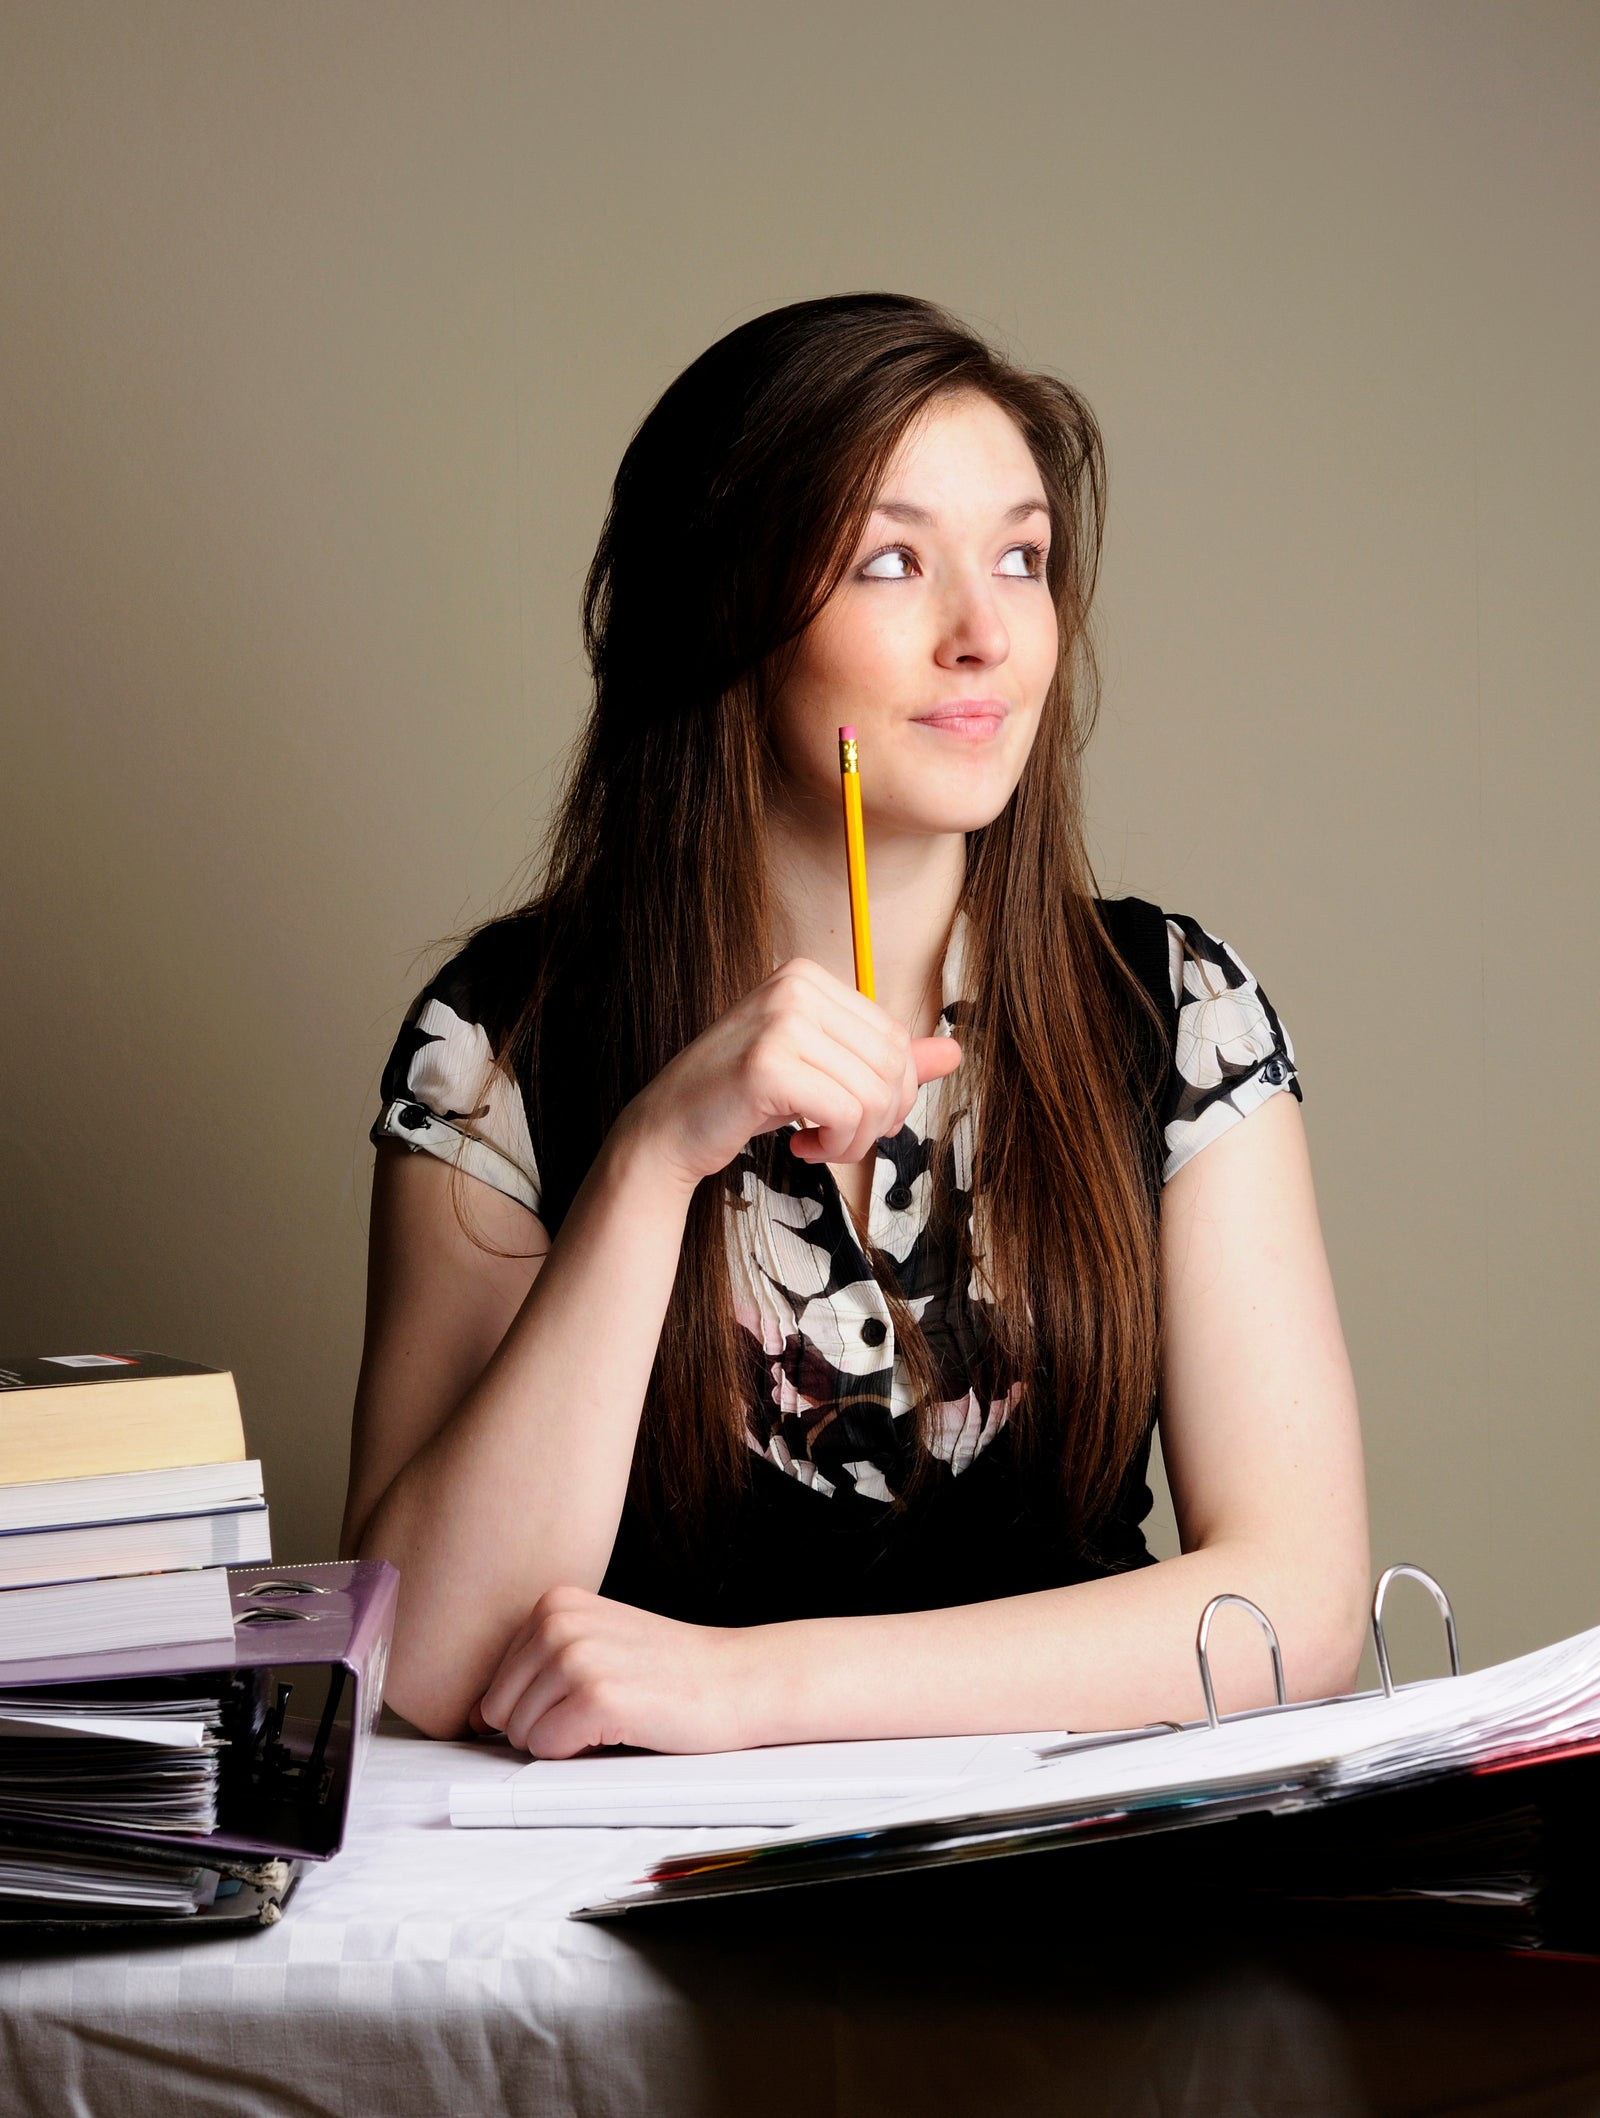 Homeschooling: One Student’s Preparation for College